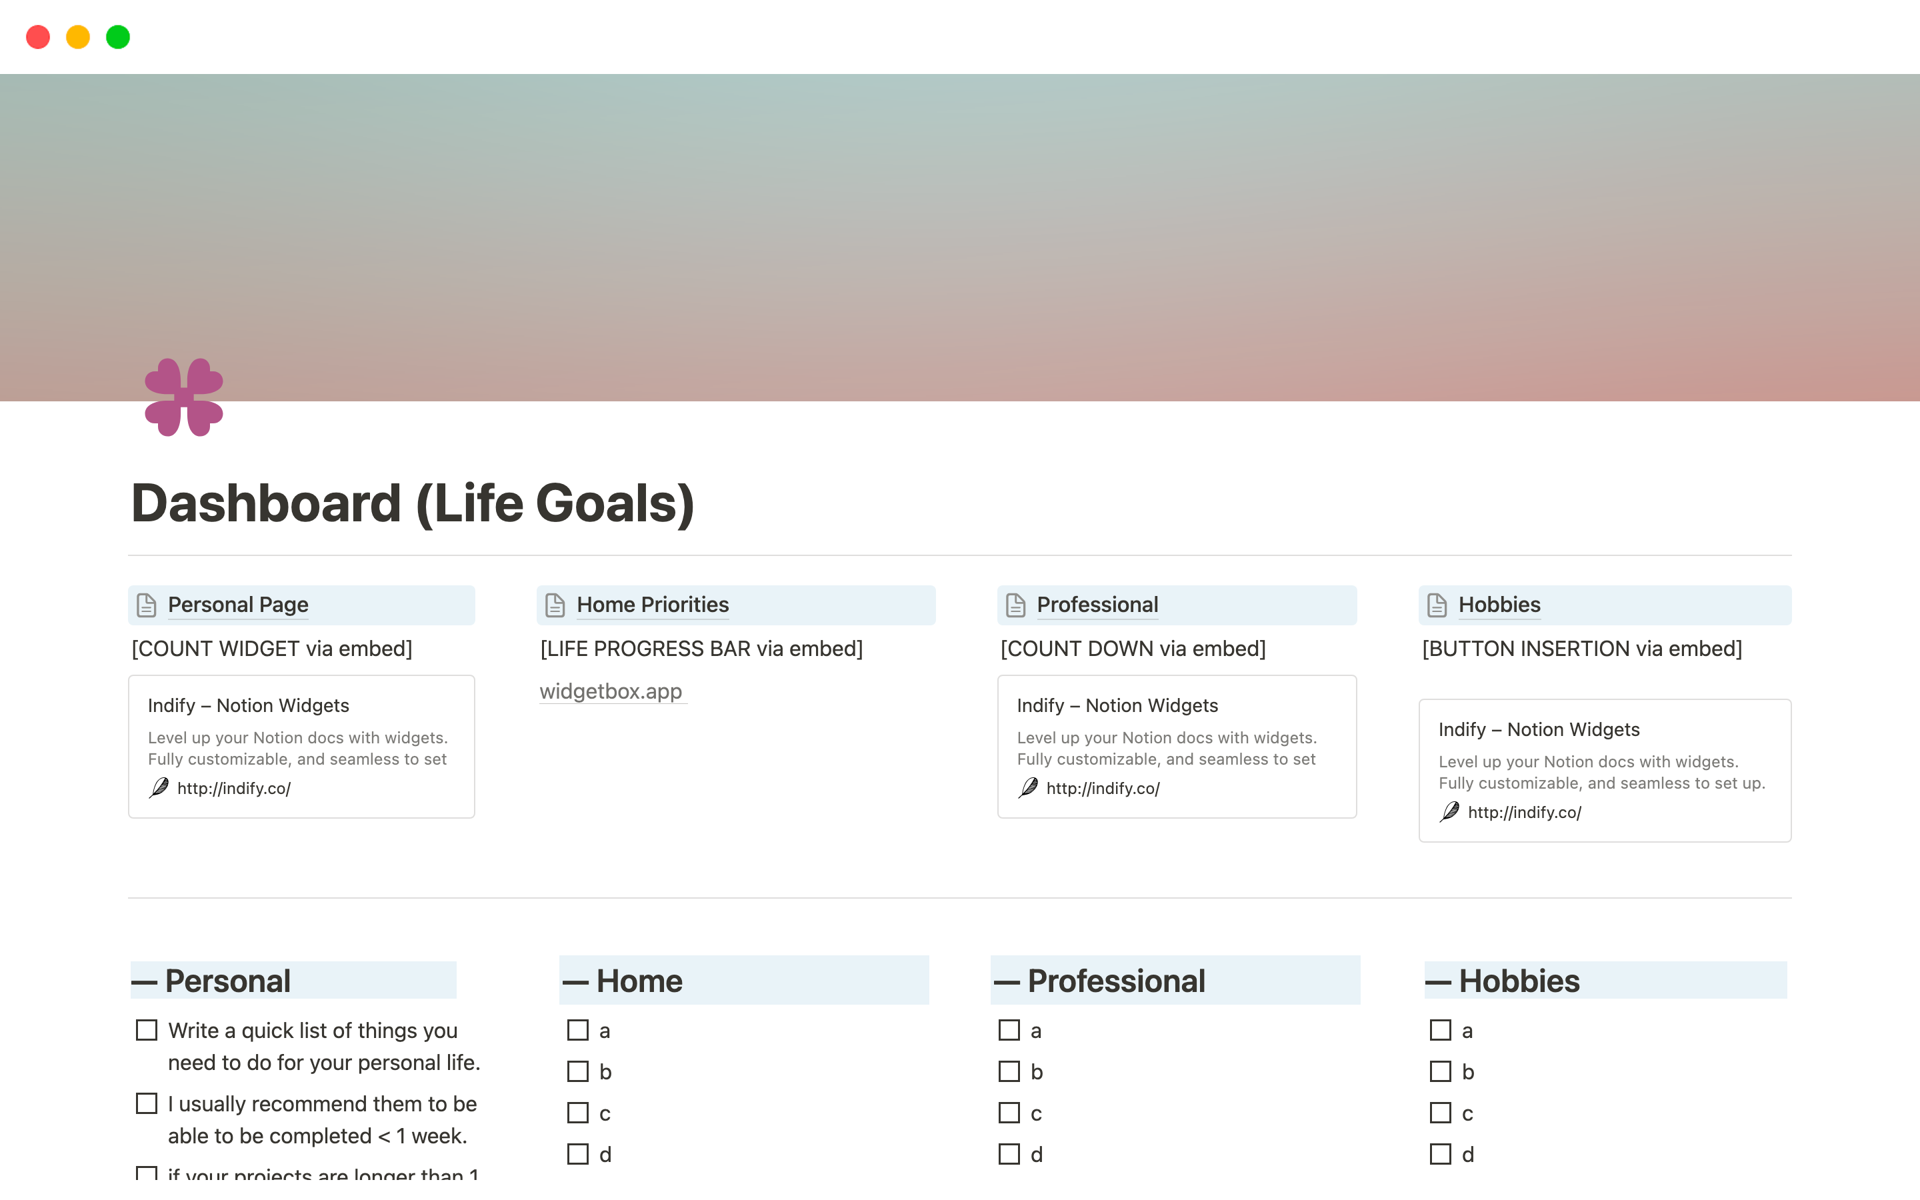 This is your main dashboard to help you start organizing your life in four major broad categories with each their respective sub-page.